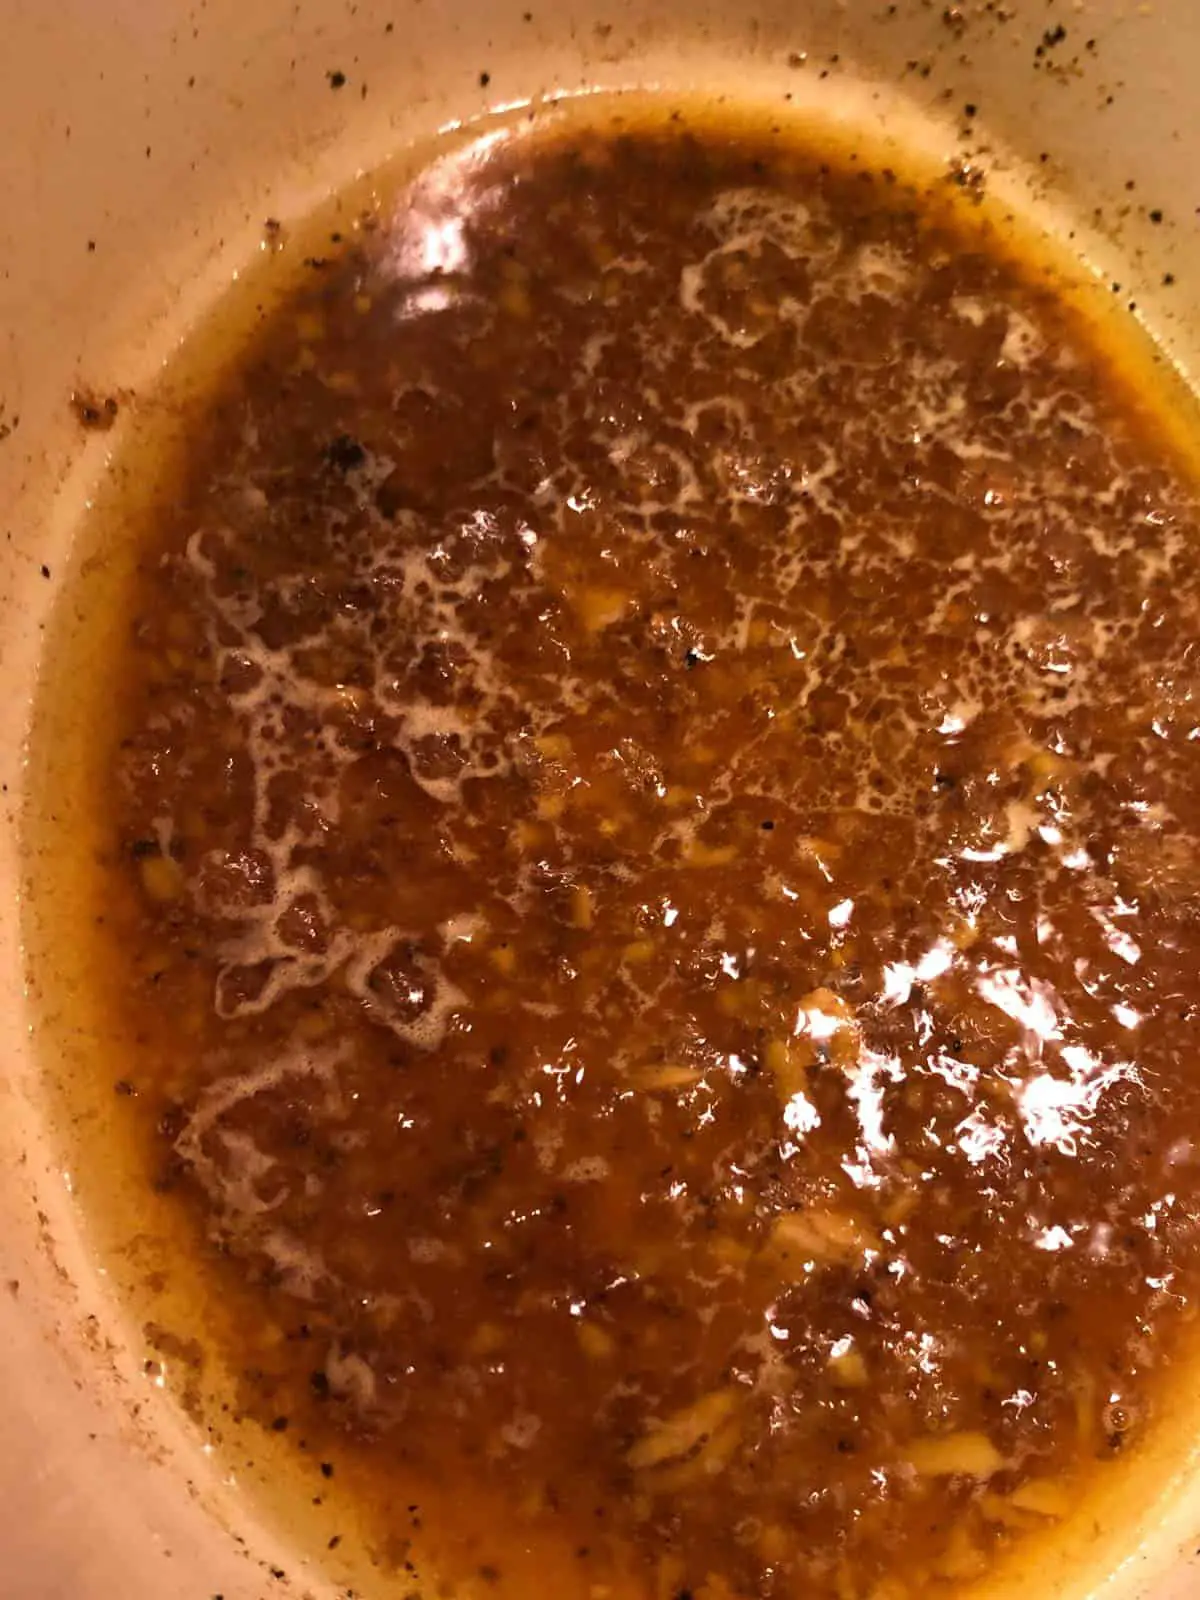 Deep brown colored braising sauce in a dutch oven.